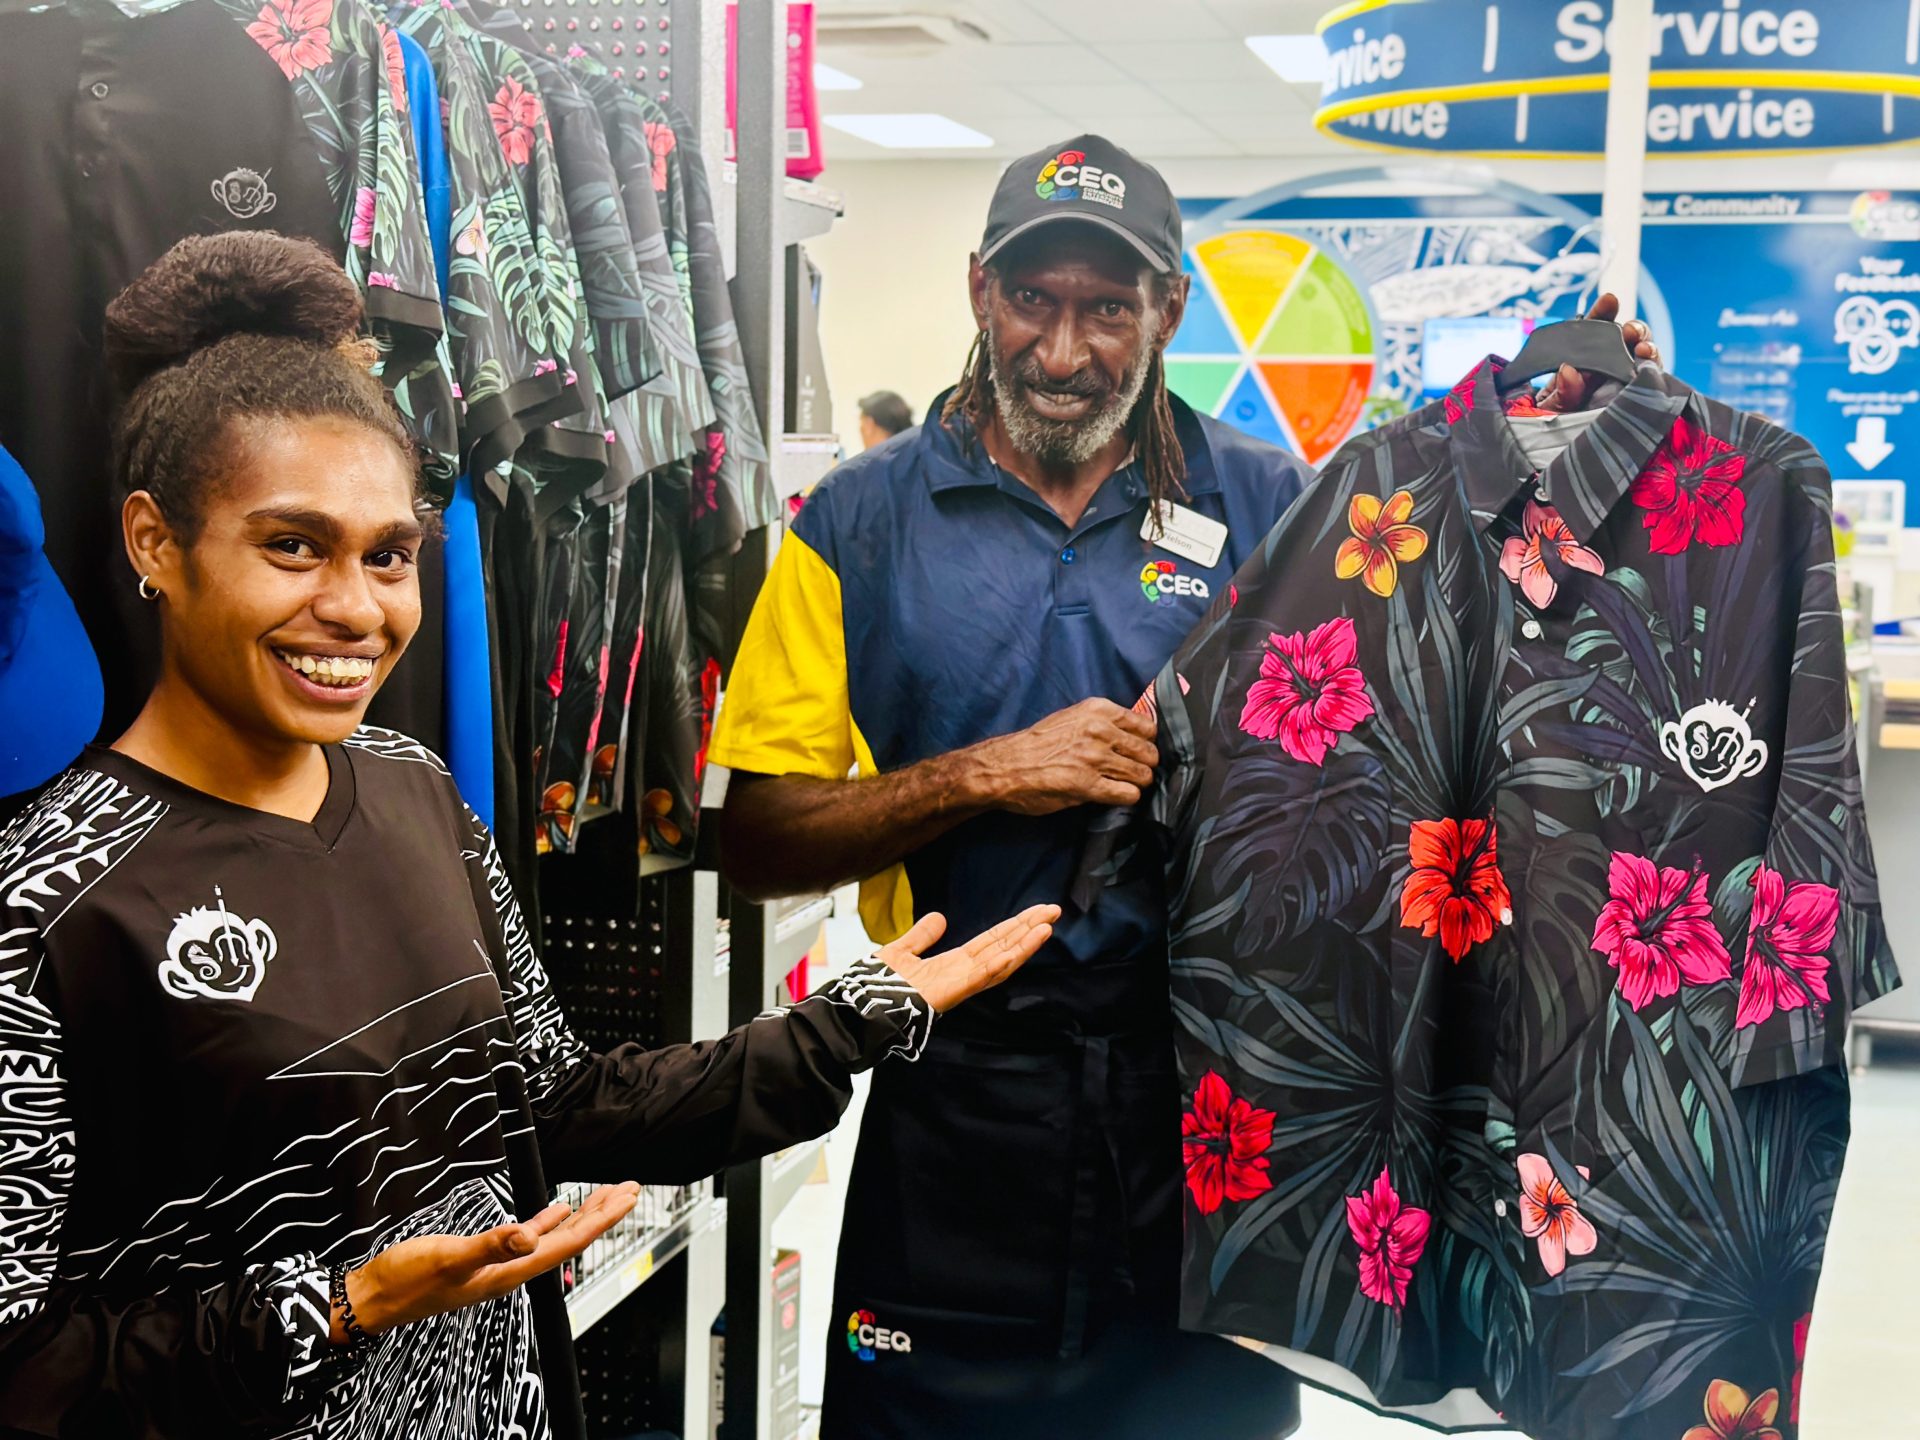 Remote store operator CEQ honours Indigenous Business Month by empowering remote Indigenous communities